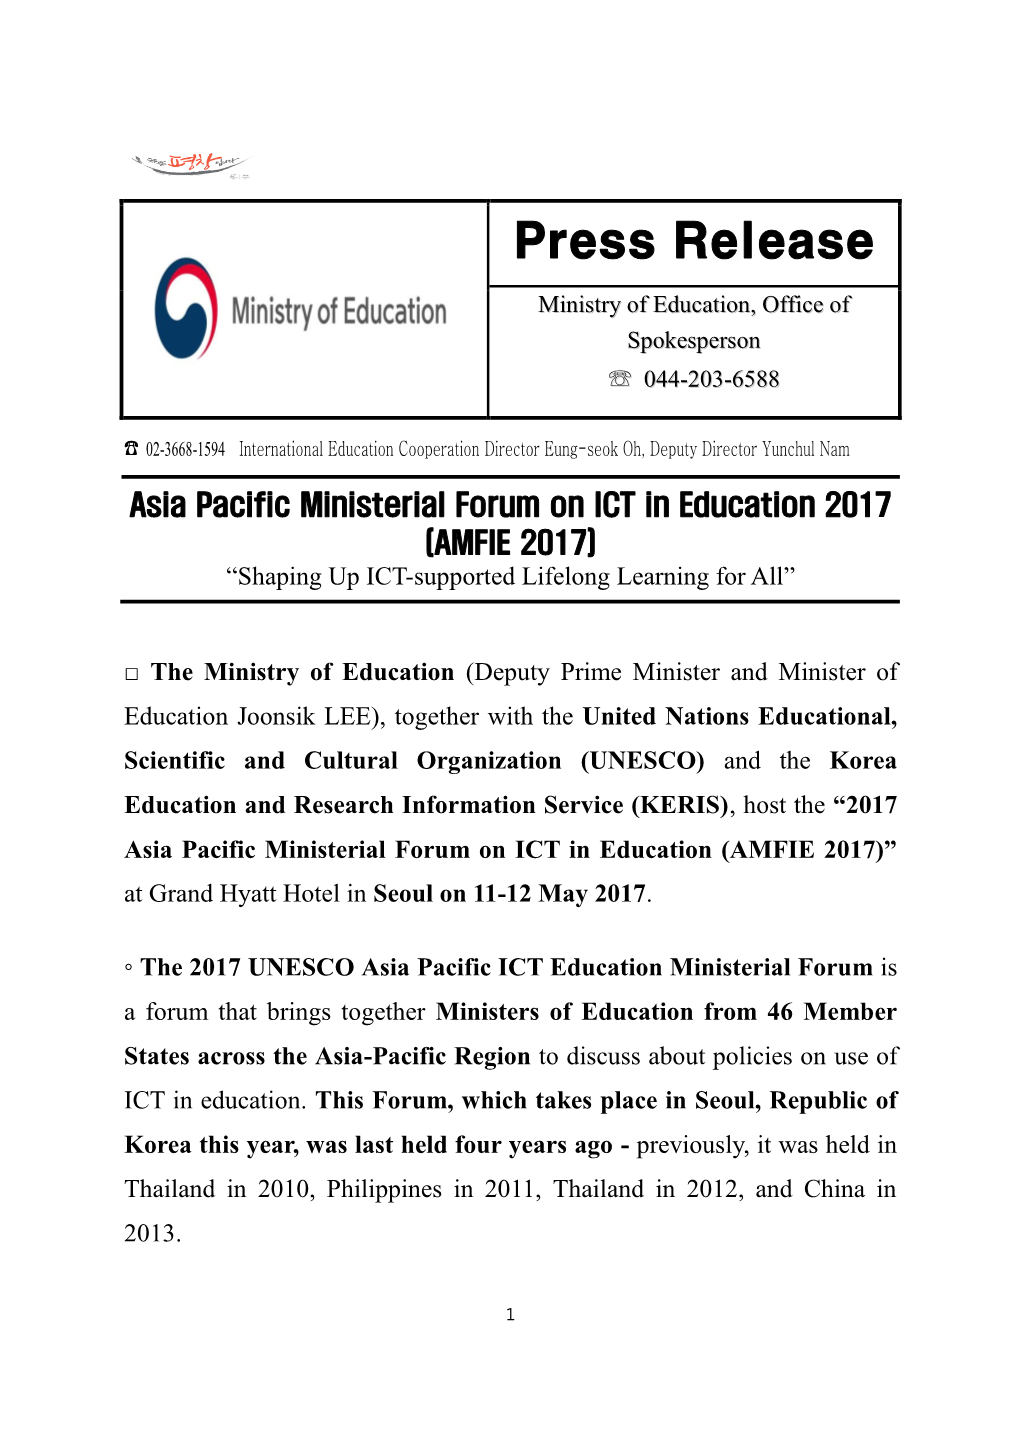 The 2017 UNESCO Asia Pacific ICT Education Ministerial Forum